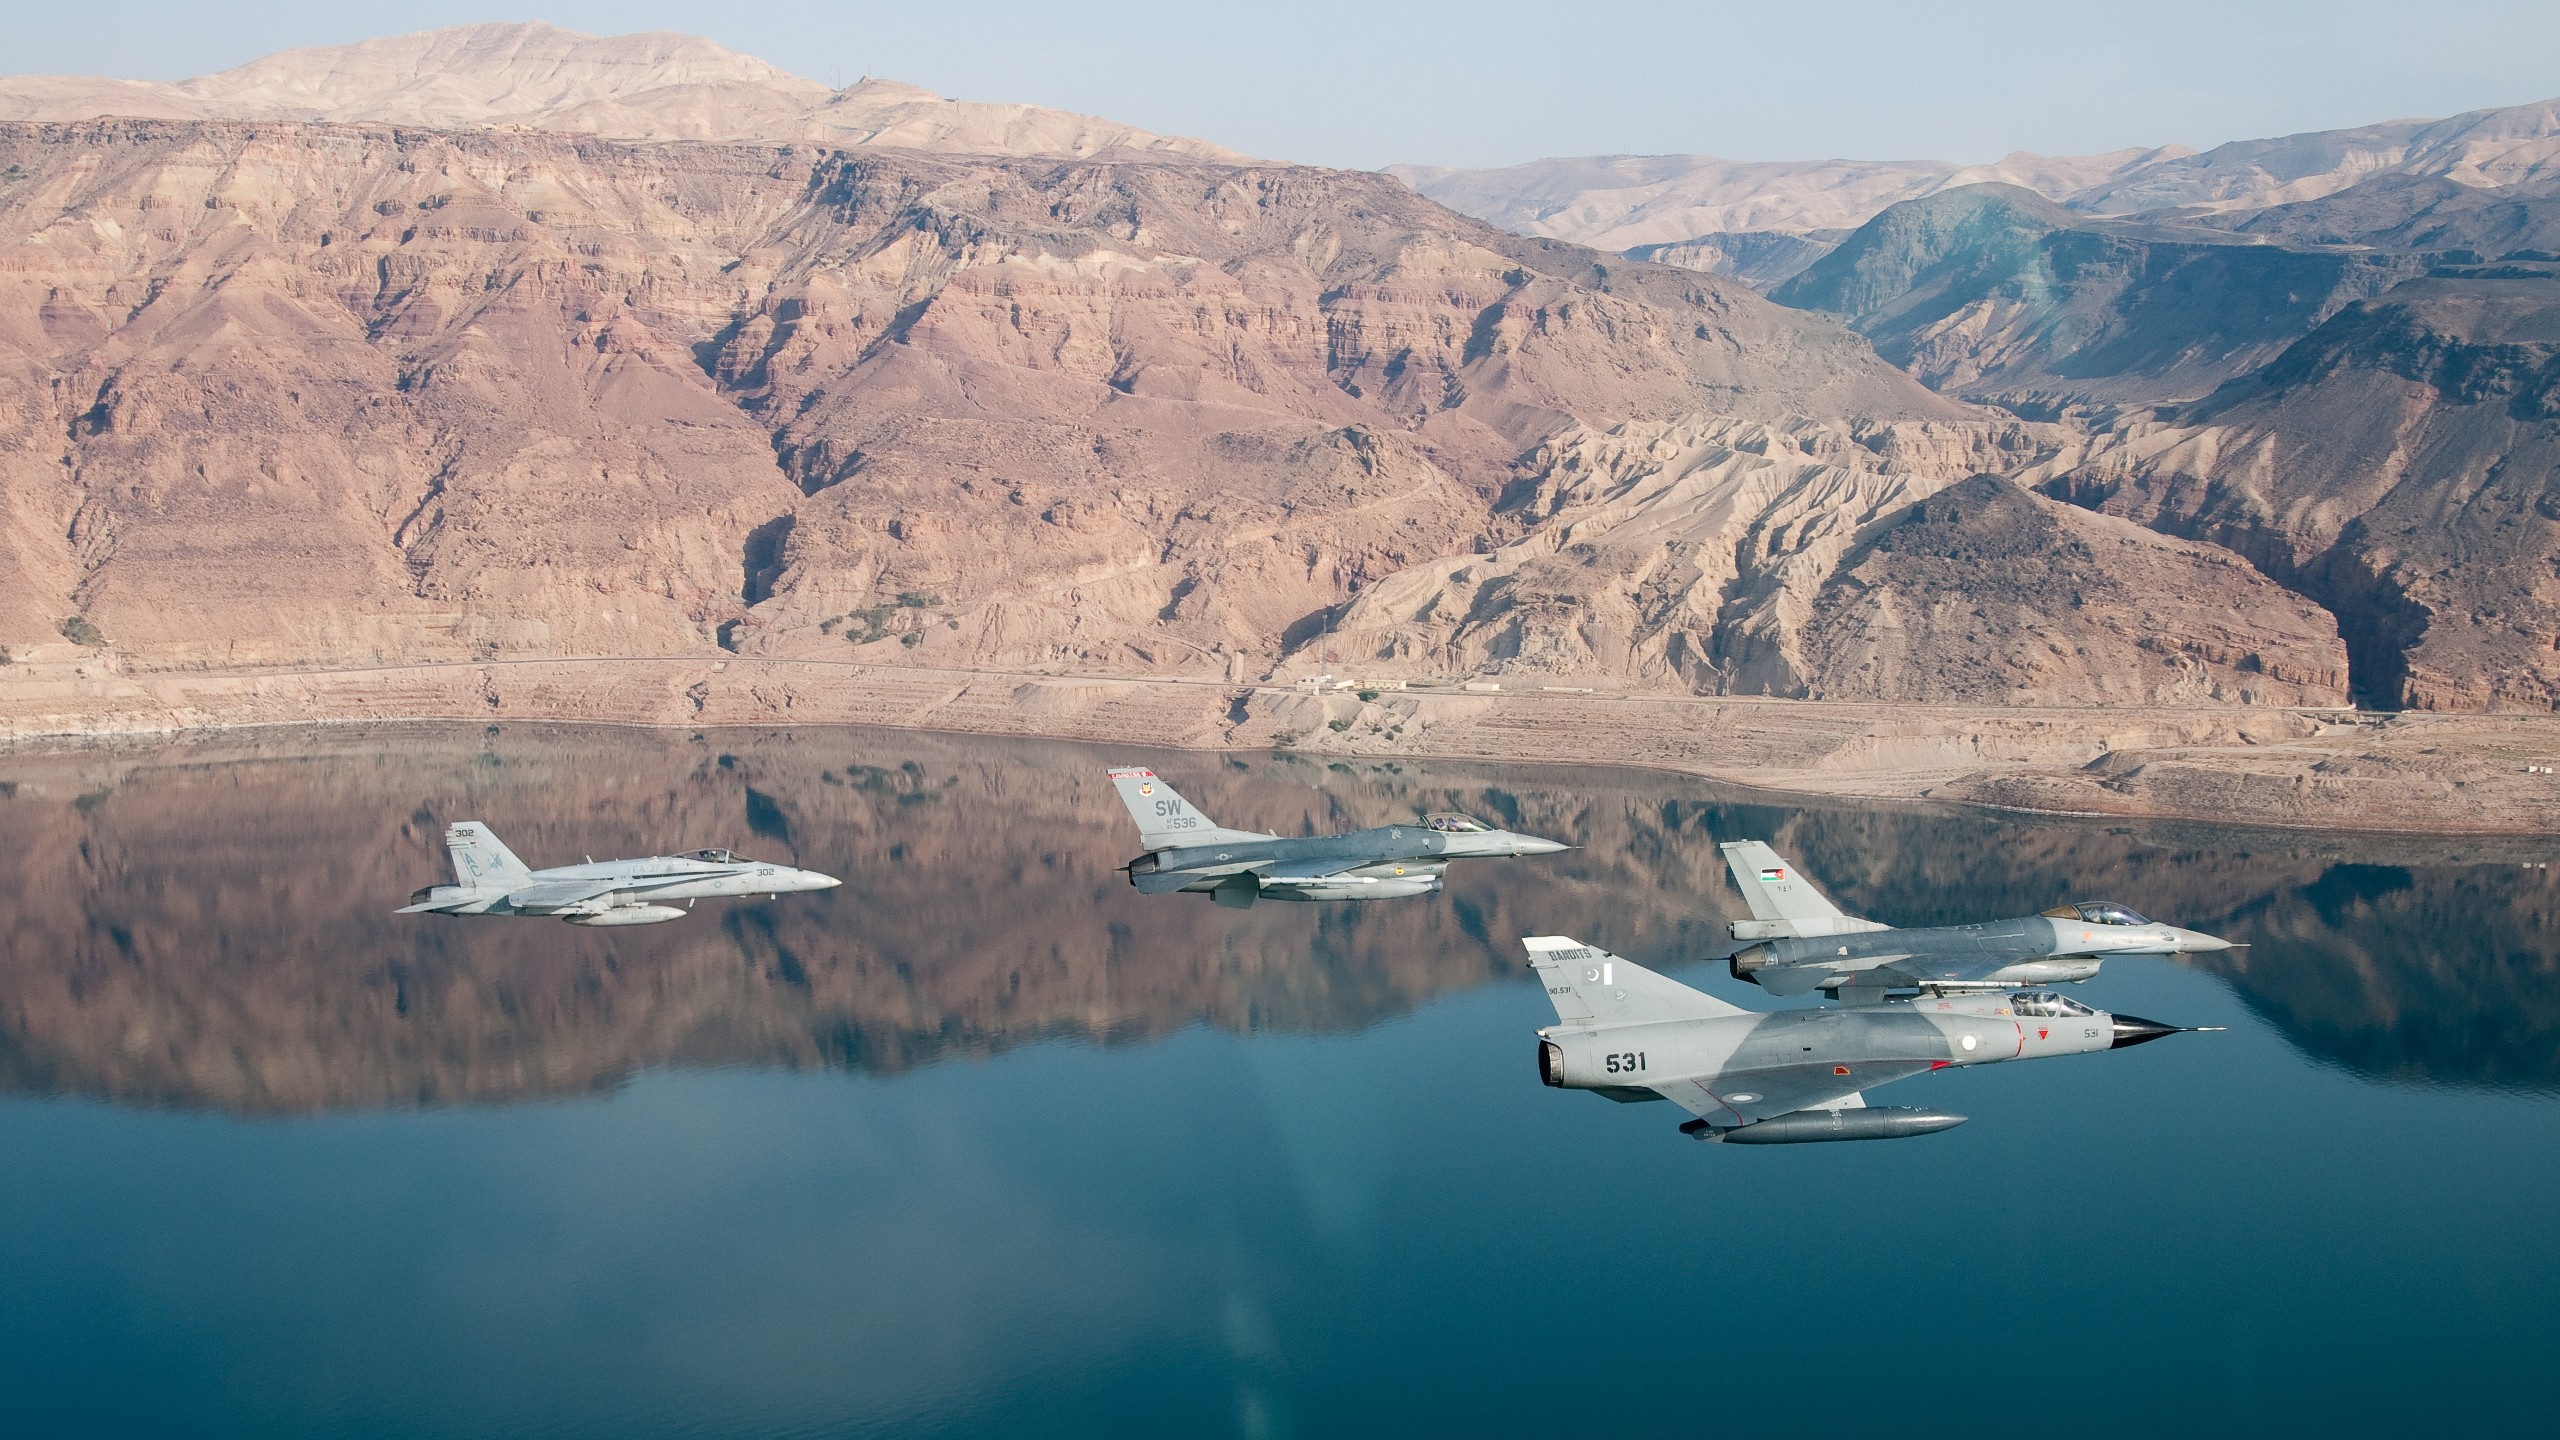 General 2560x1440 military McDonnell Douglas F/A-18 Hornet United States Navy General Dynamics F-16 Fighting Falcon lake mountains vehicle aircraft military aircraft military vehicle Dassault Mirage 2000 Royal Jordanian Air Force Pakistan air force US Air Force jet fighter